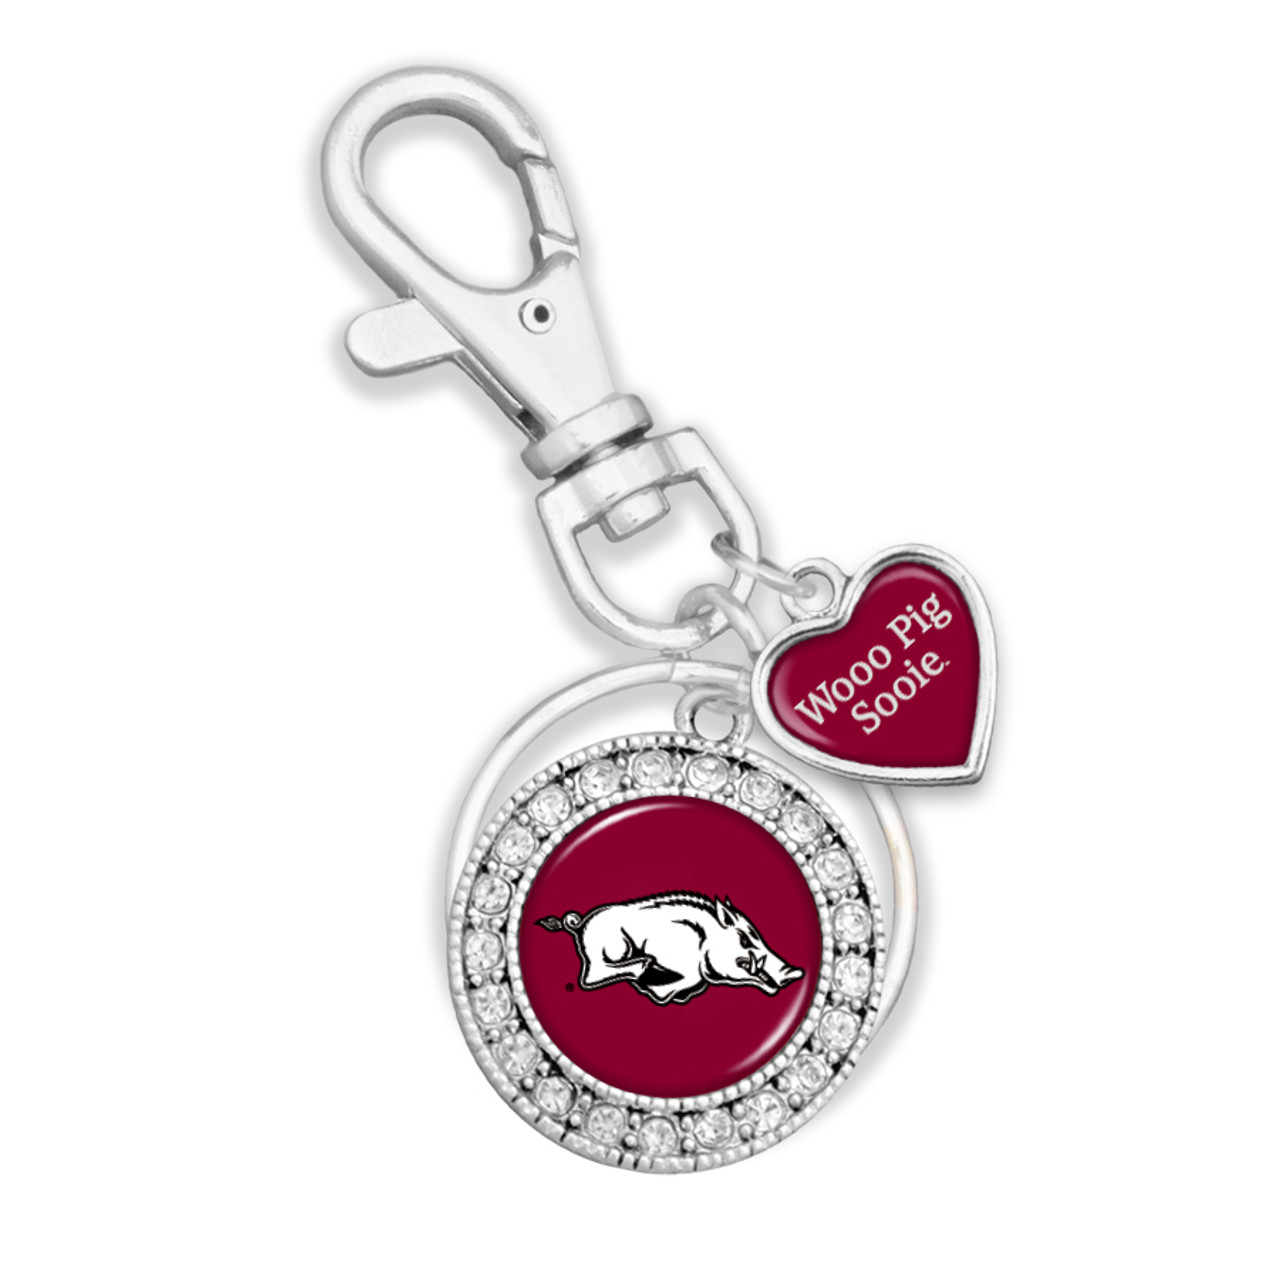 *Choose Your College* Key Chain- Round Logo with Spirit Slogan Heart Accent